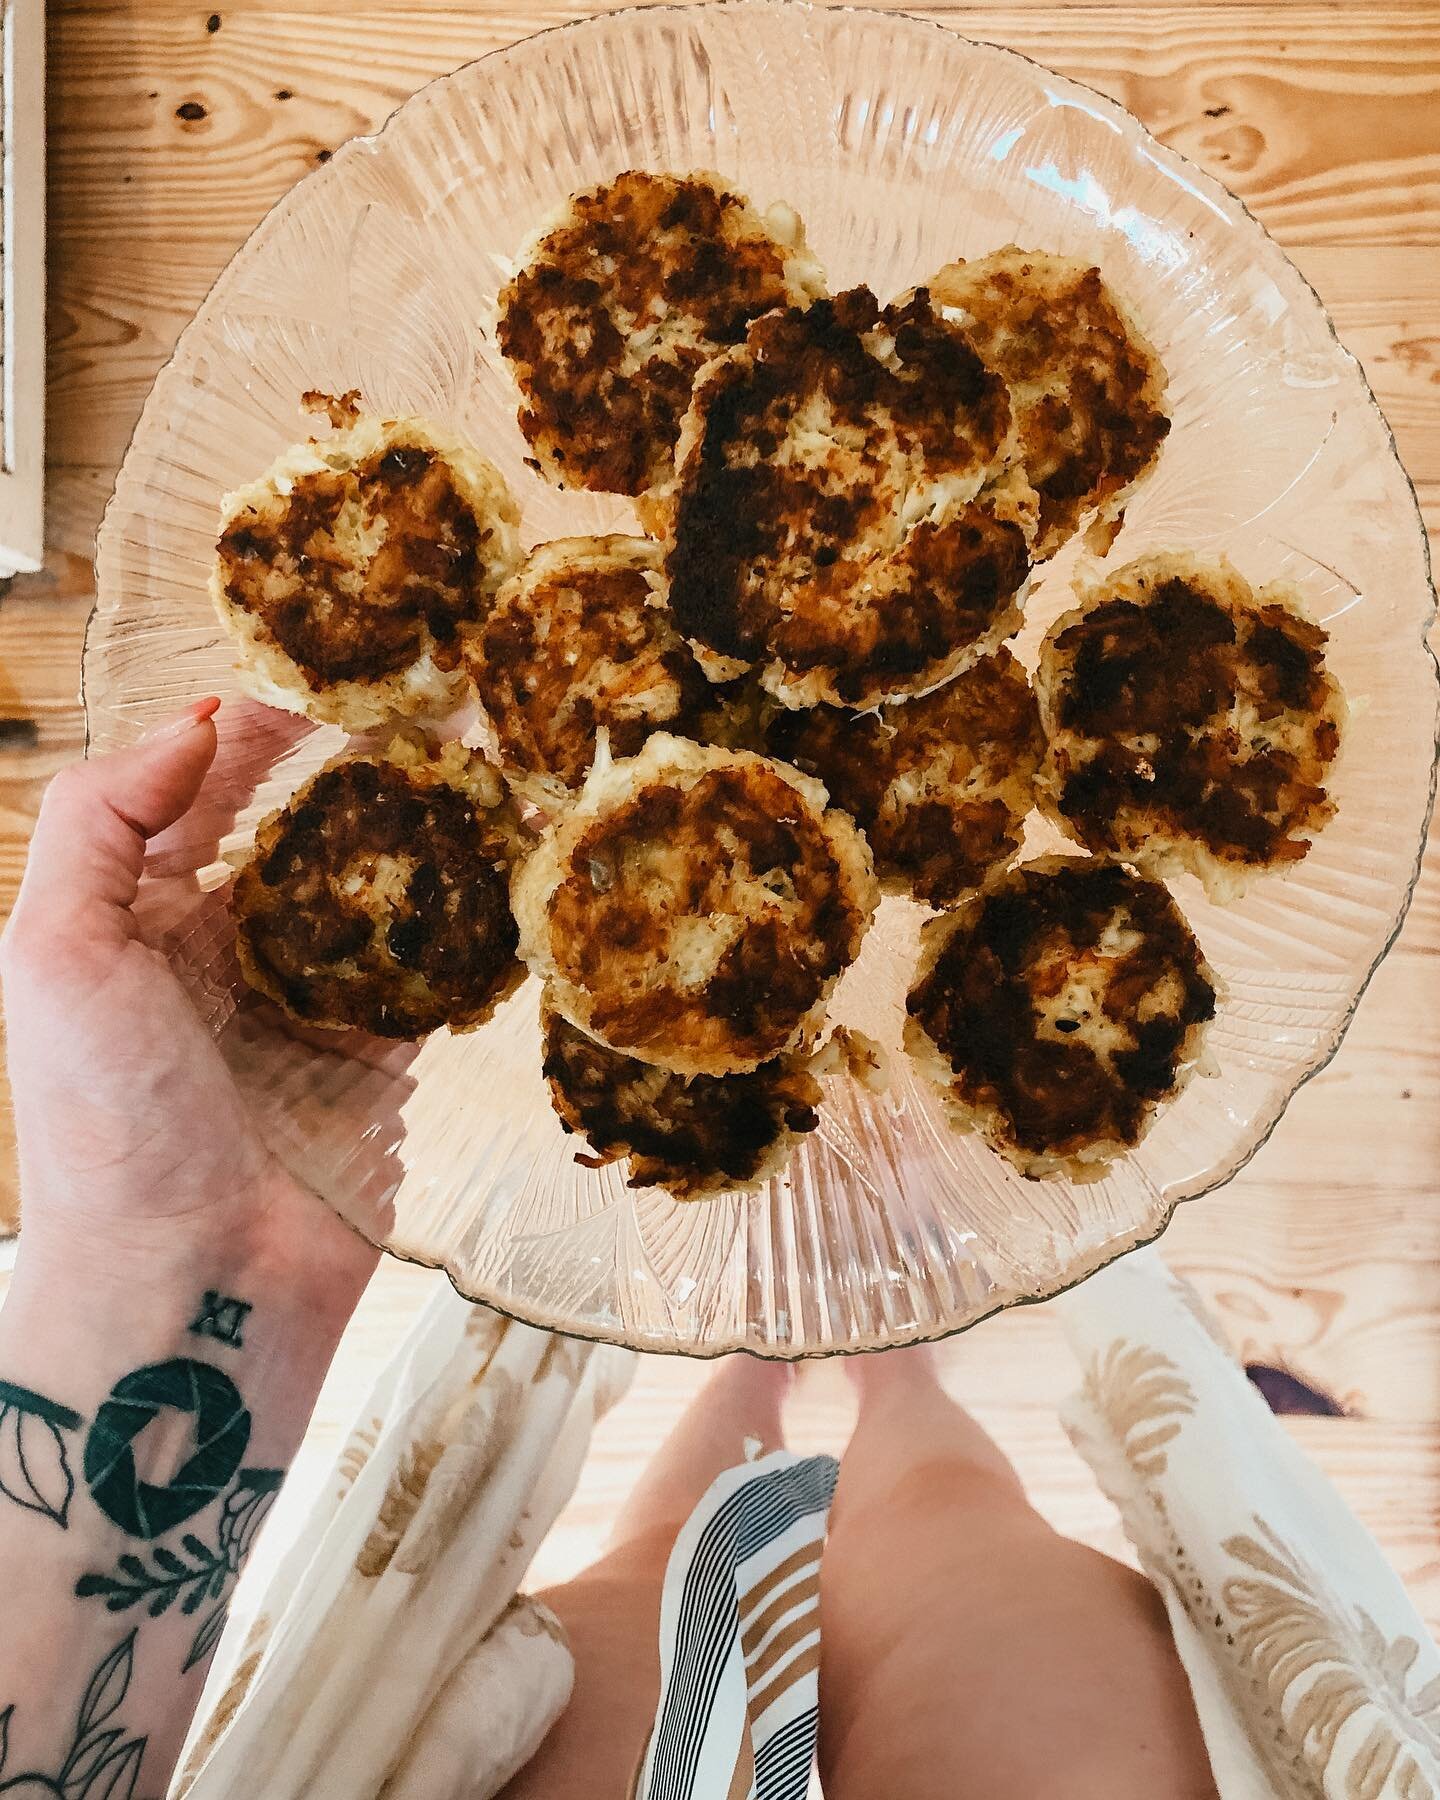 First go at crab cakes.
&bull;
#marylandcrabs #marylandcrabcakes #crabcakes #summer #summertime #vacation #vacationvibes #cooking